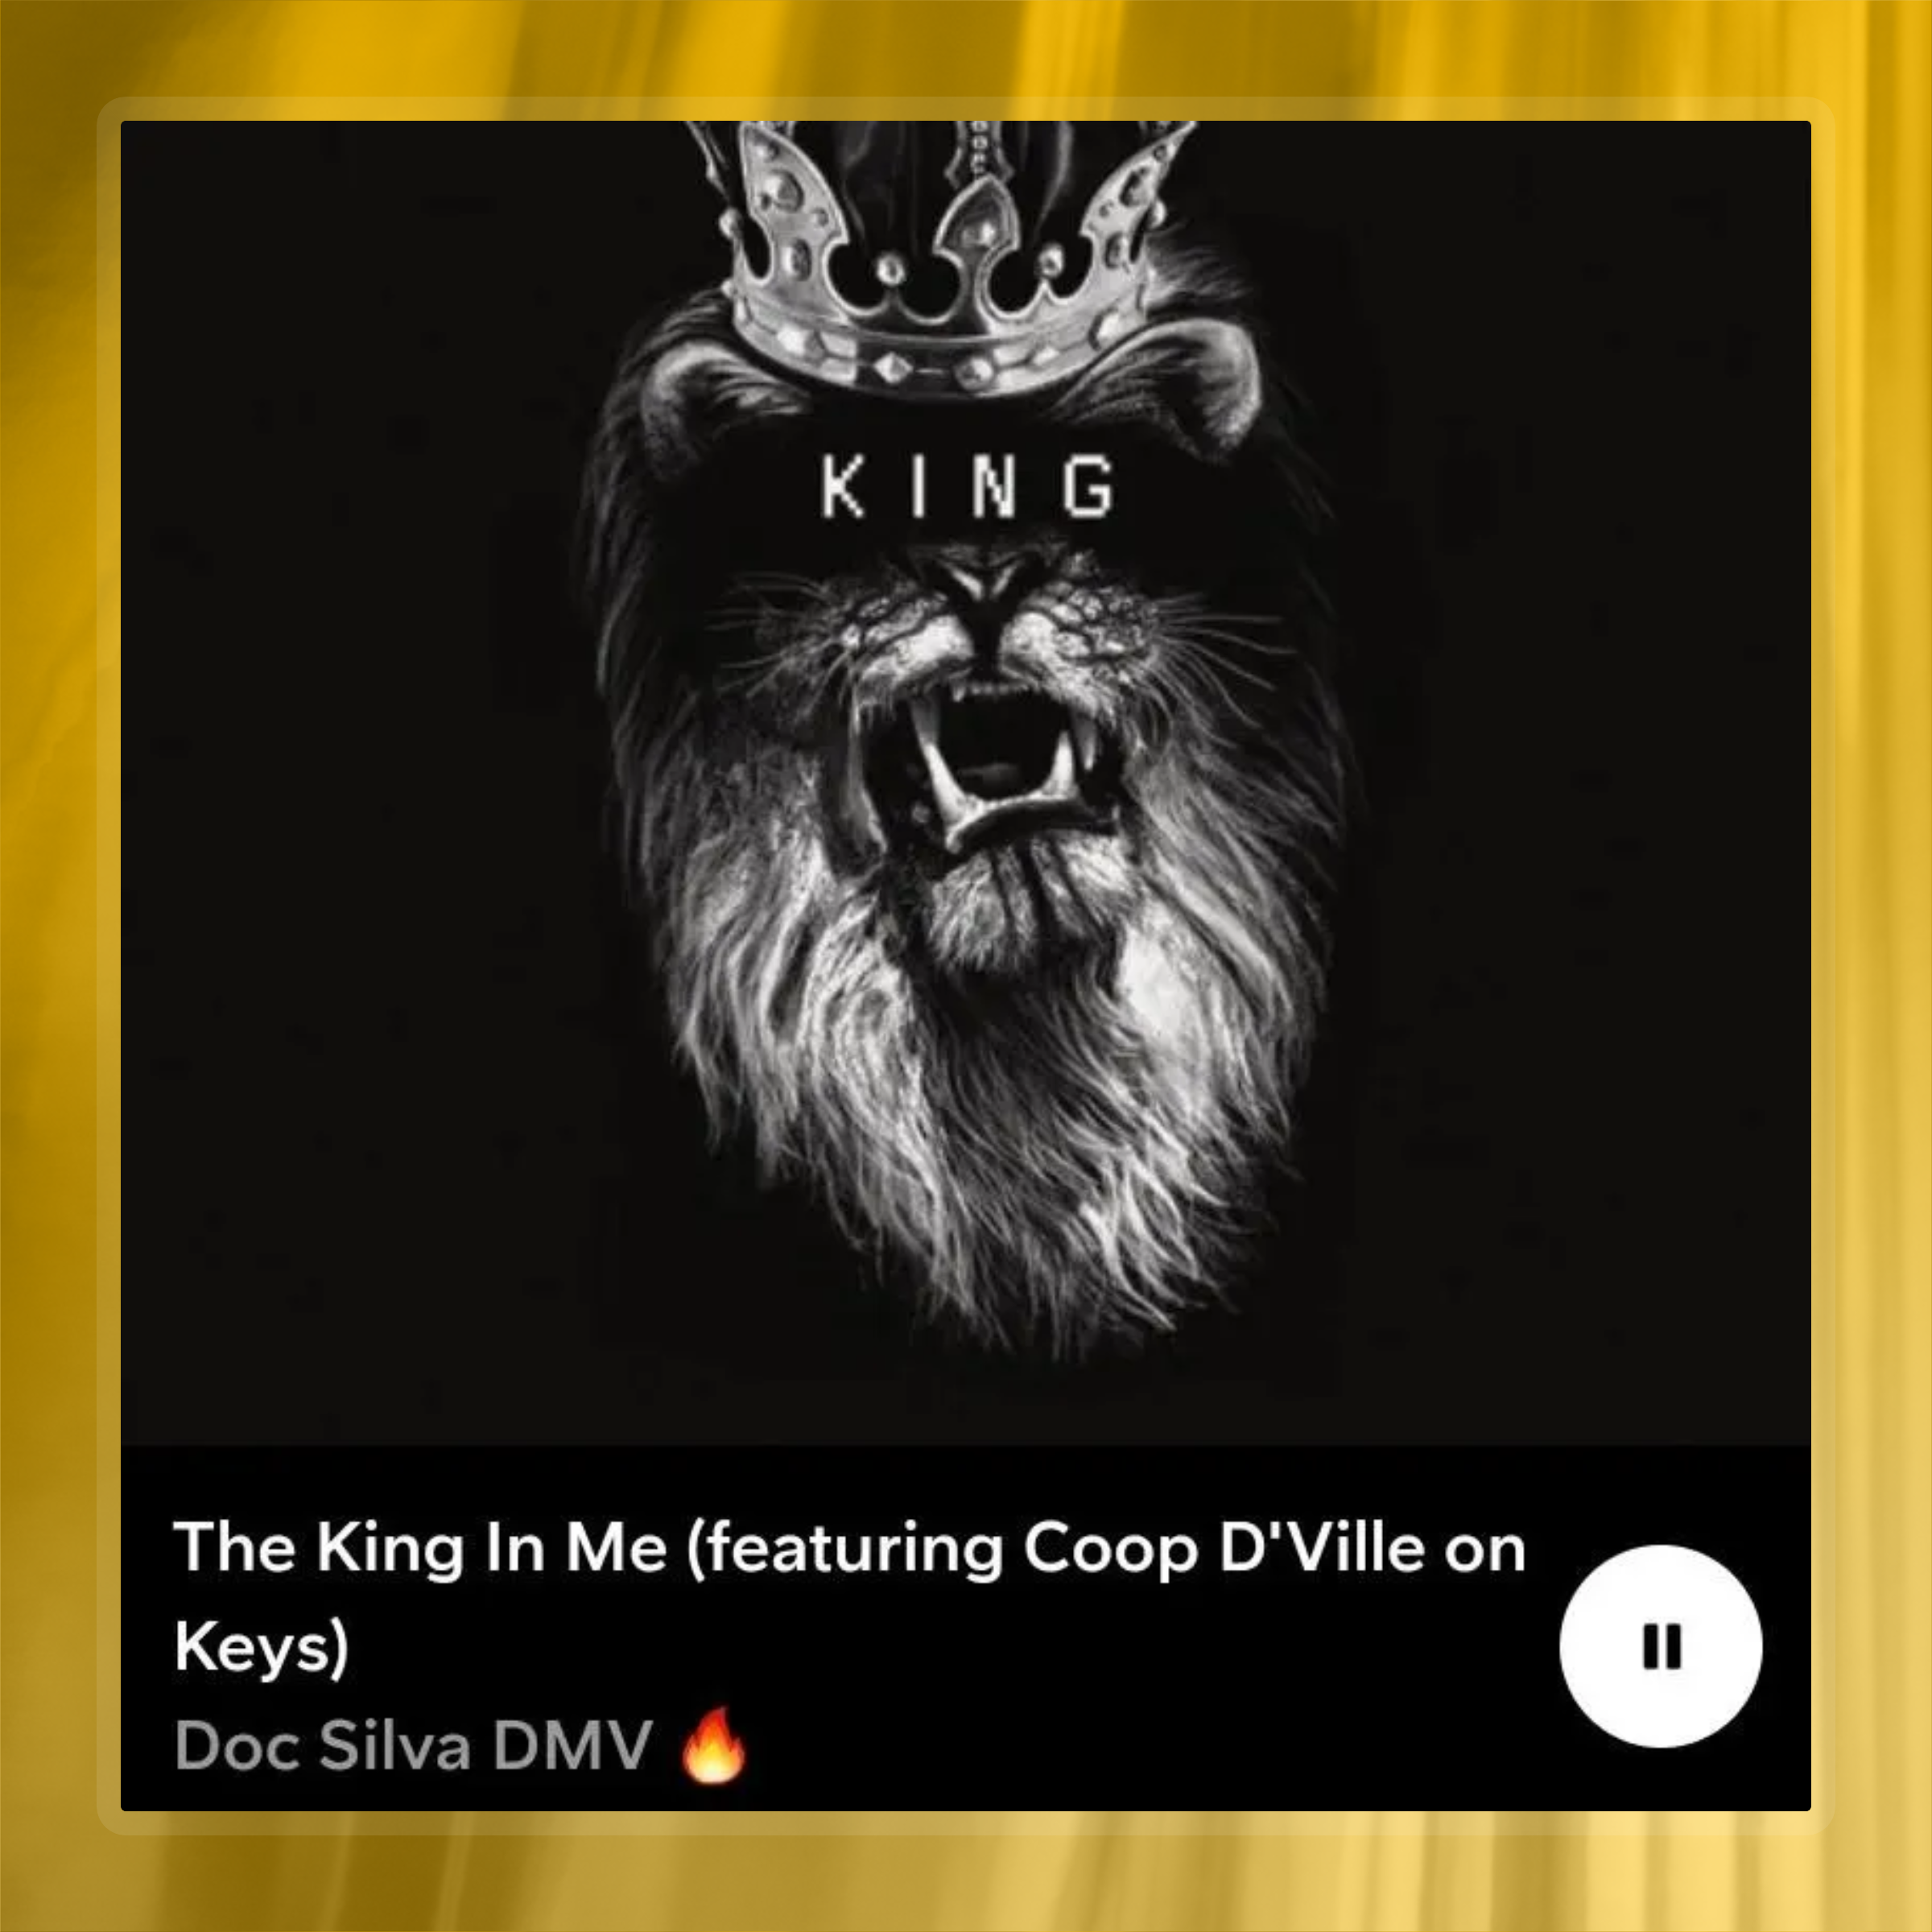 The King In Me (featuring Coop D'Ville on Keys)